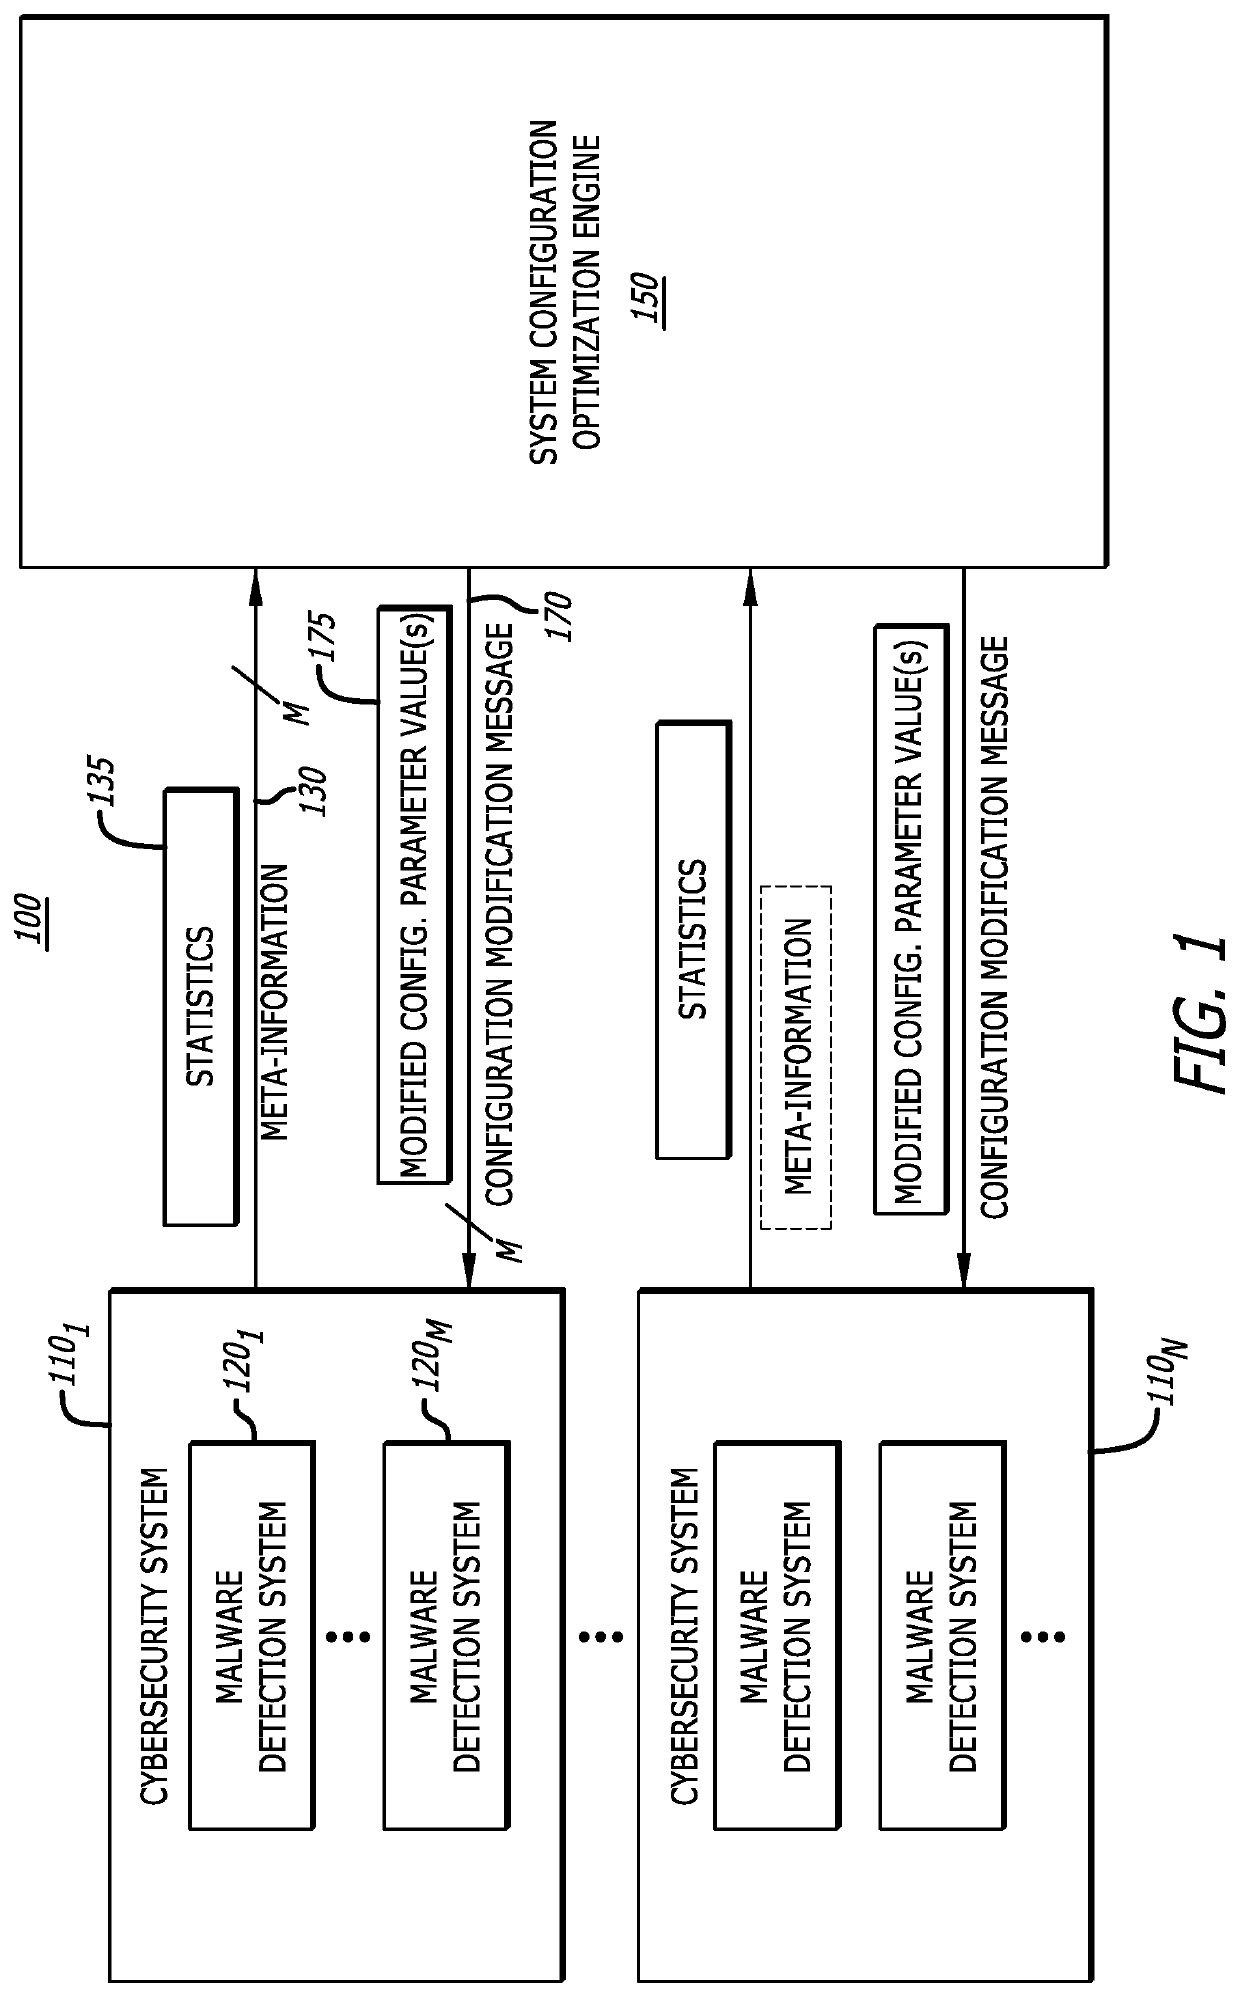 System and method for predicting and mitigating cybersecurity system misconfigurations